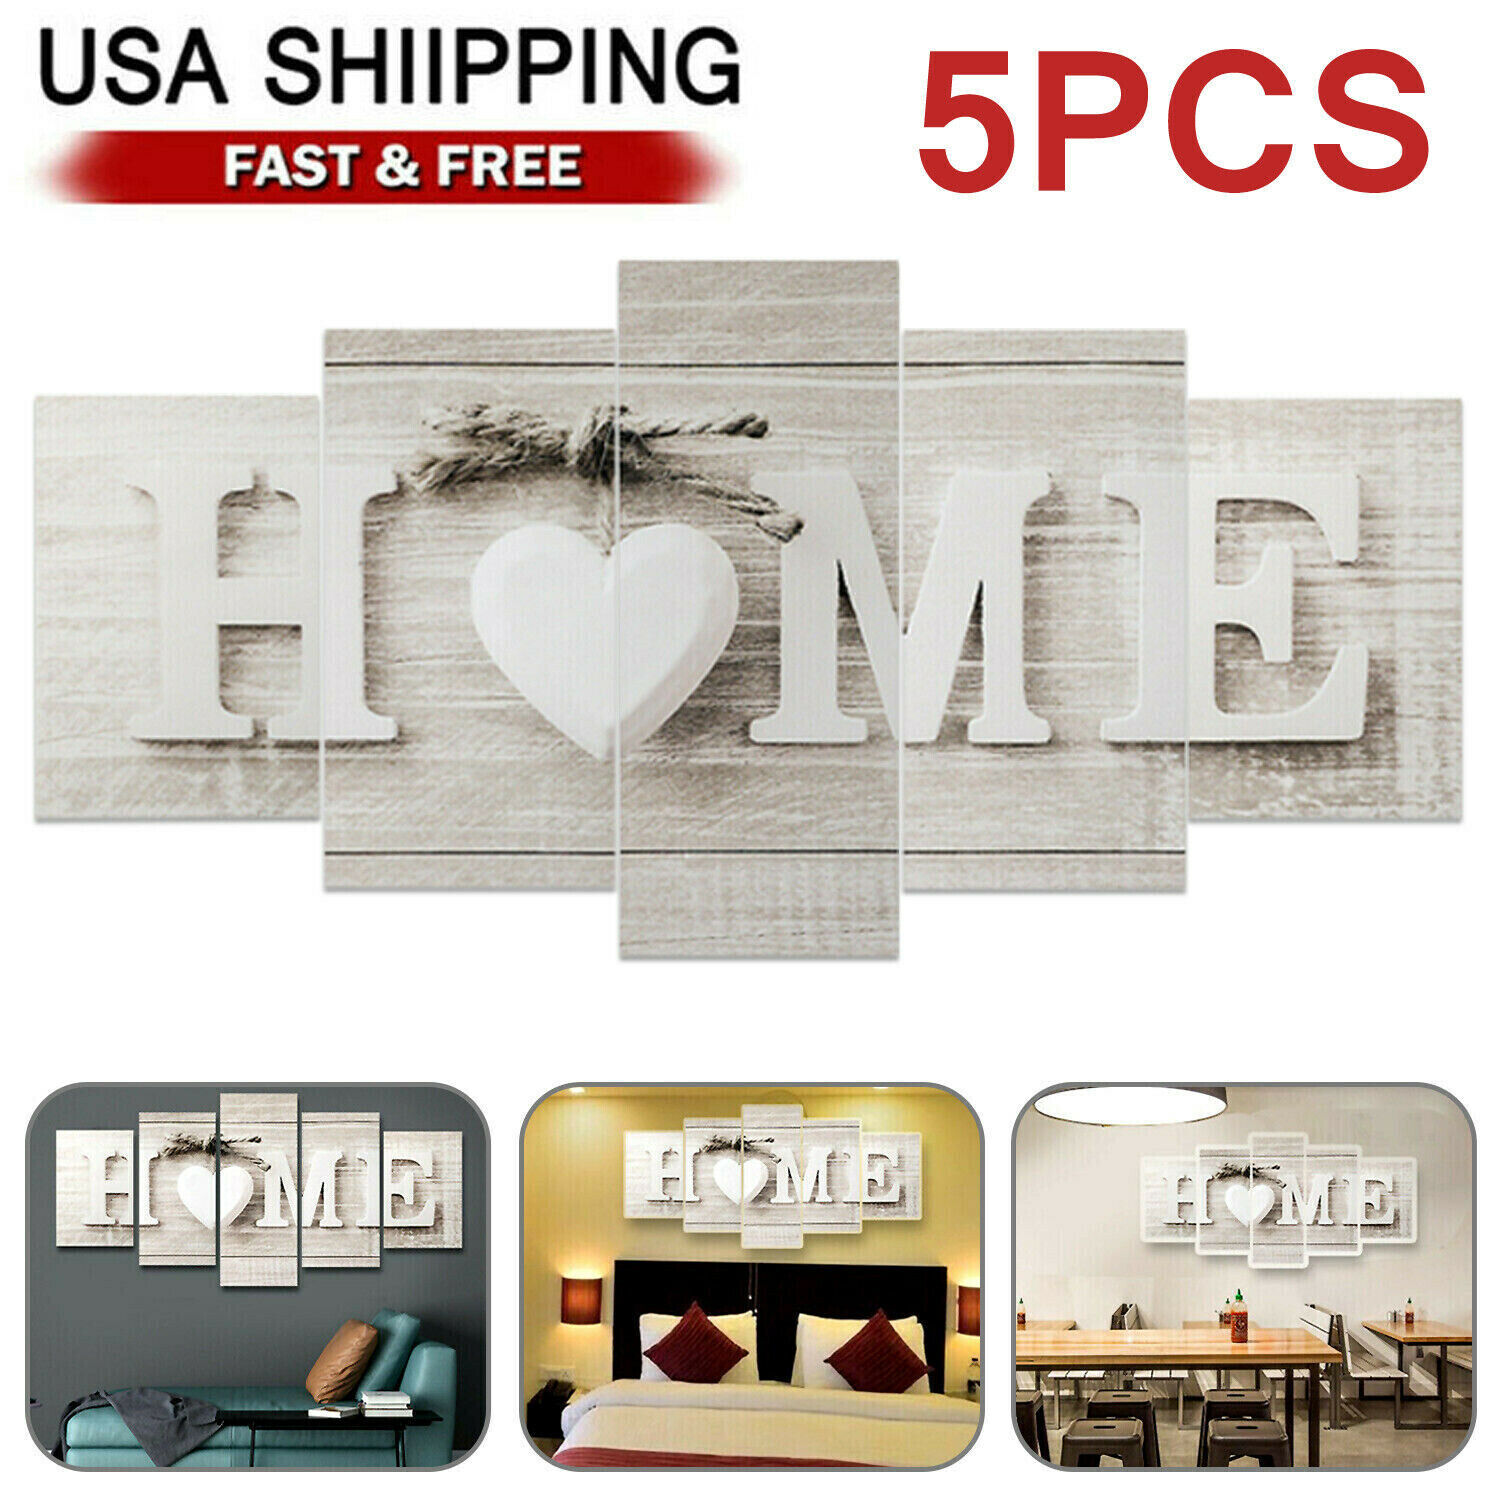 5Pcs Unframed Modern Wall Art Painting Print Set Canva Picture Home Room Decor Unbranded